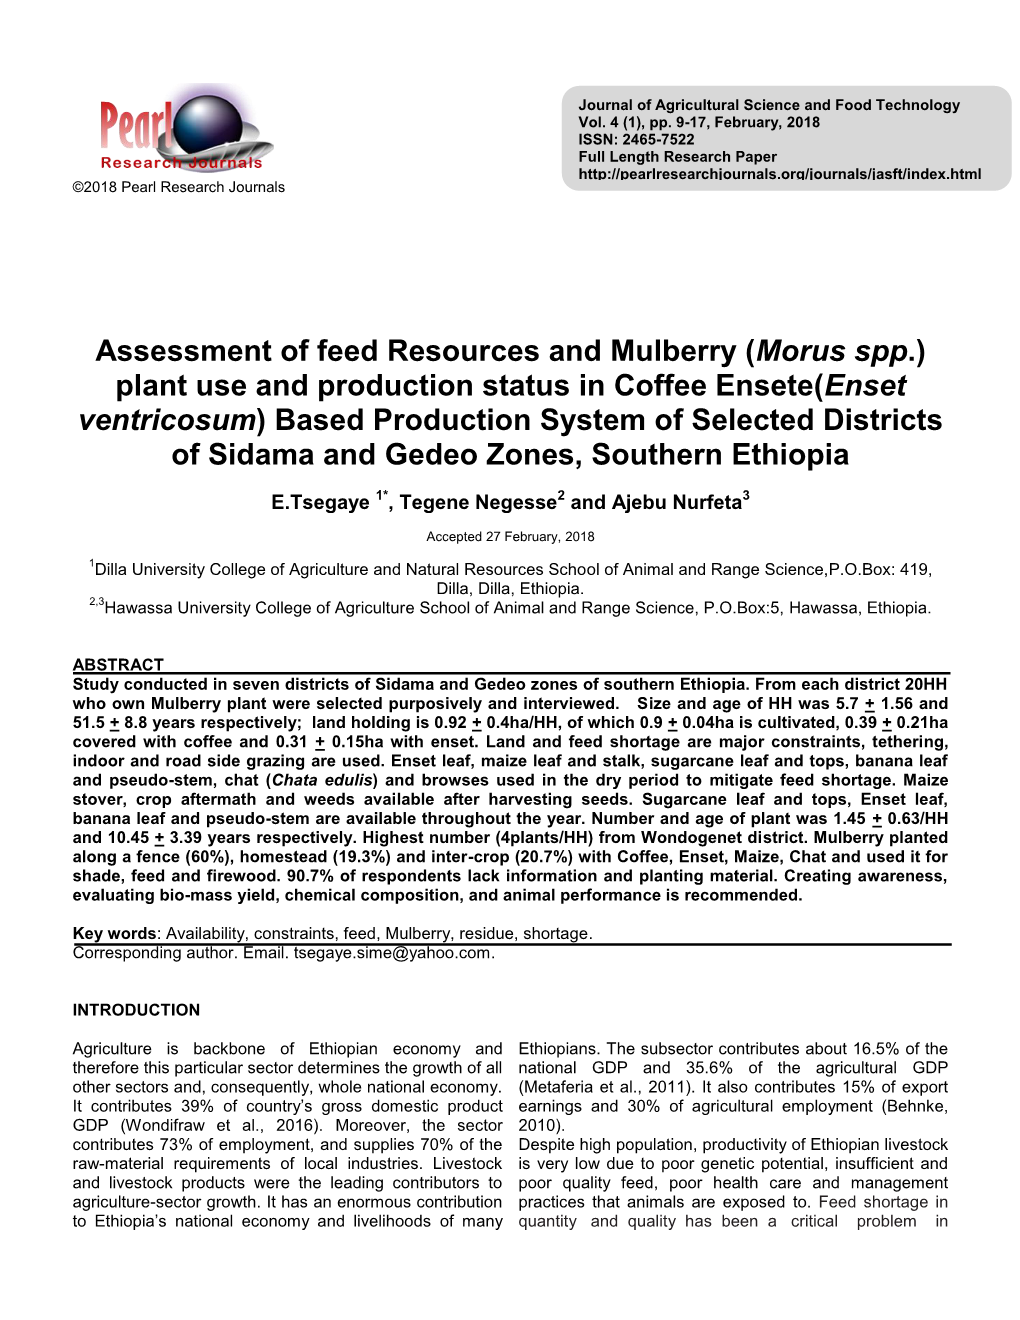 Assessment of Feed Resources and Mulberry